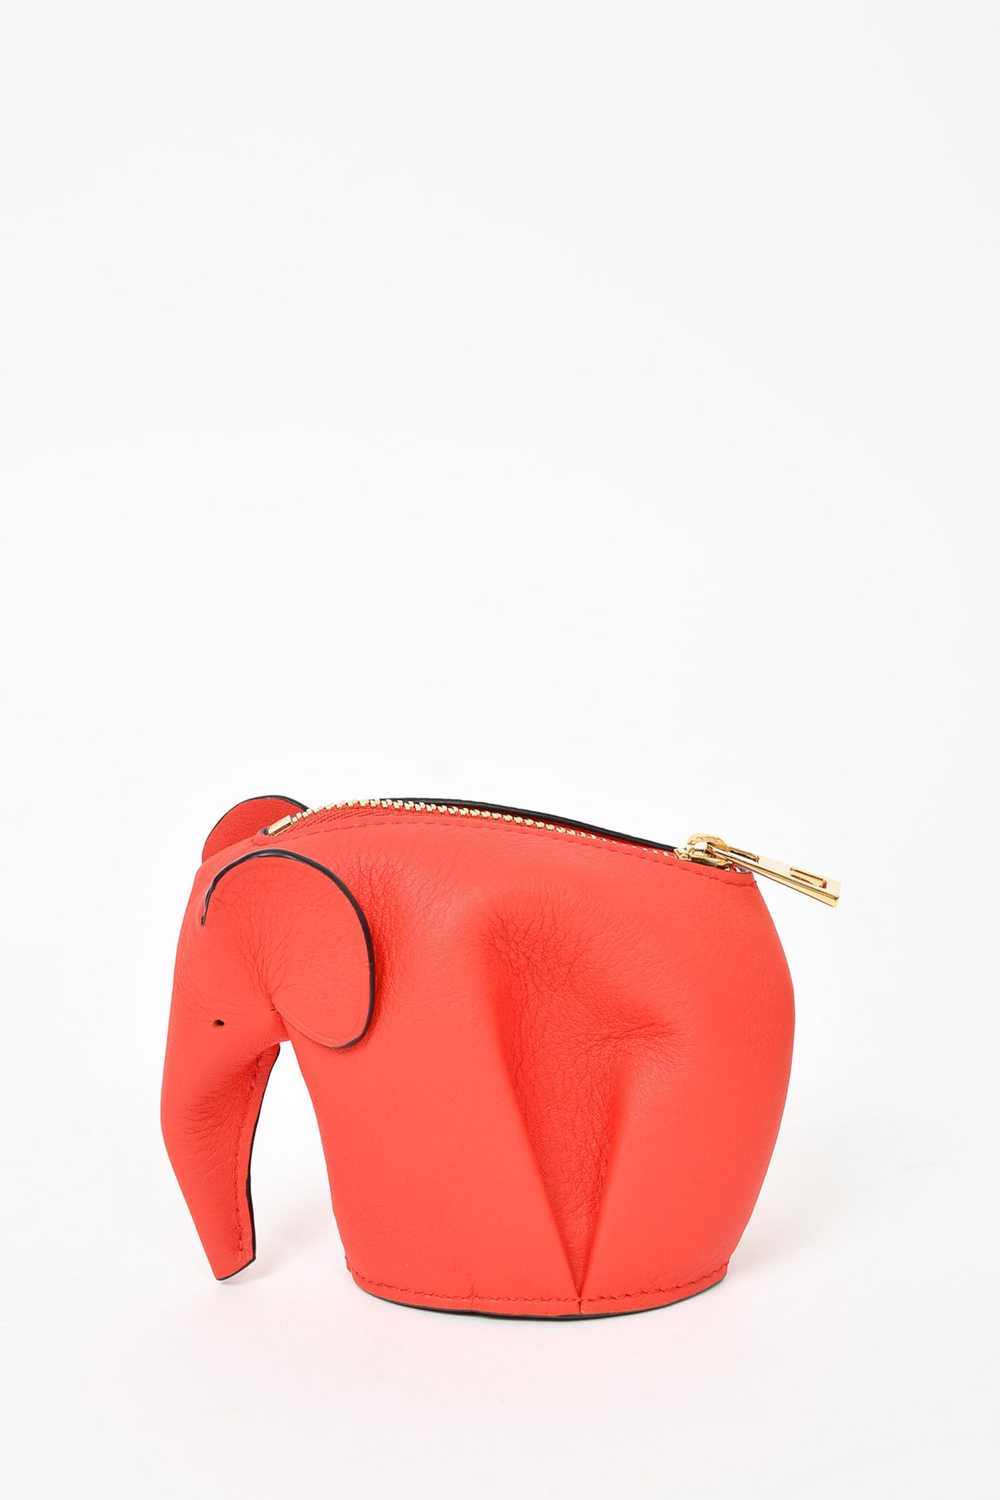 Loewe Red Leather Elephant Coin Purse - image 2